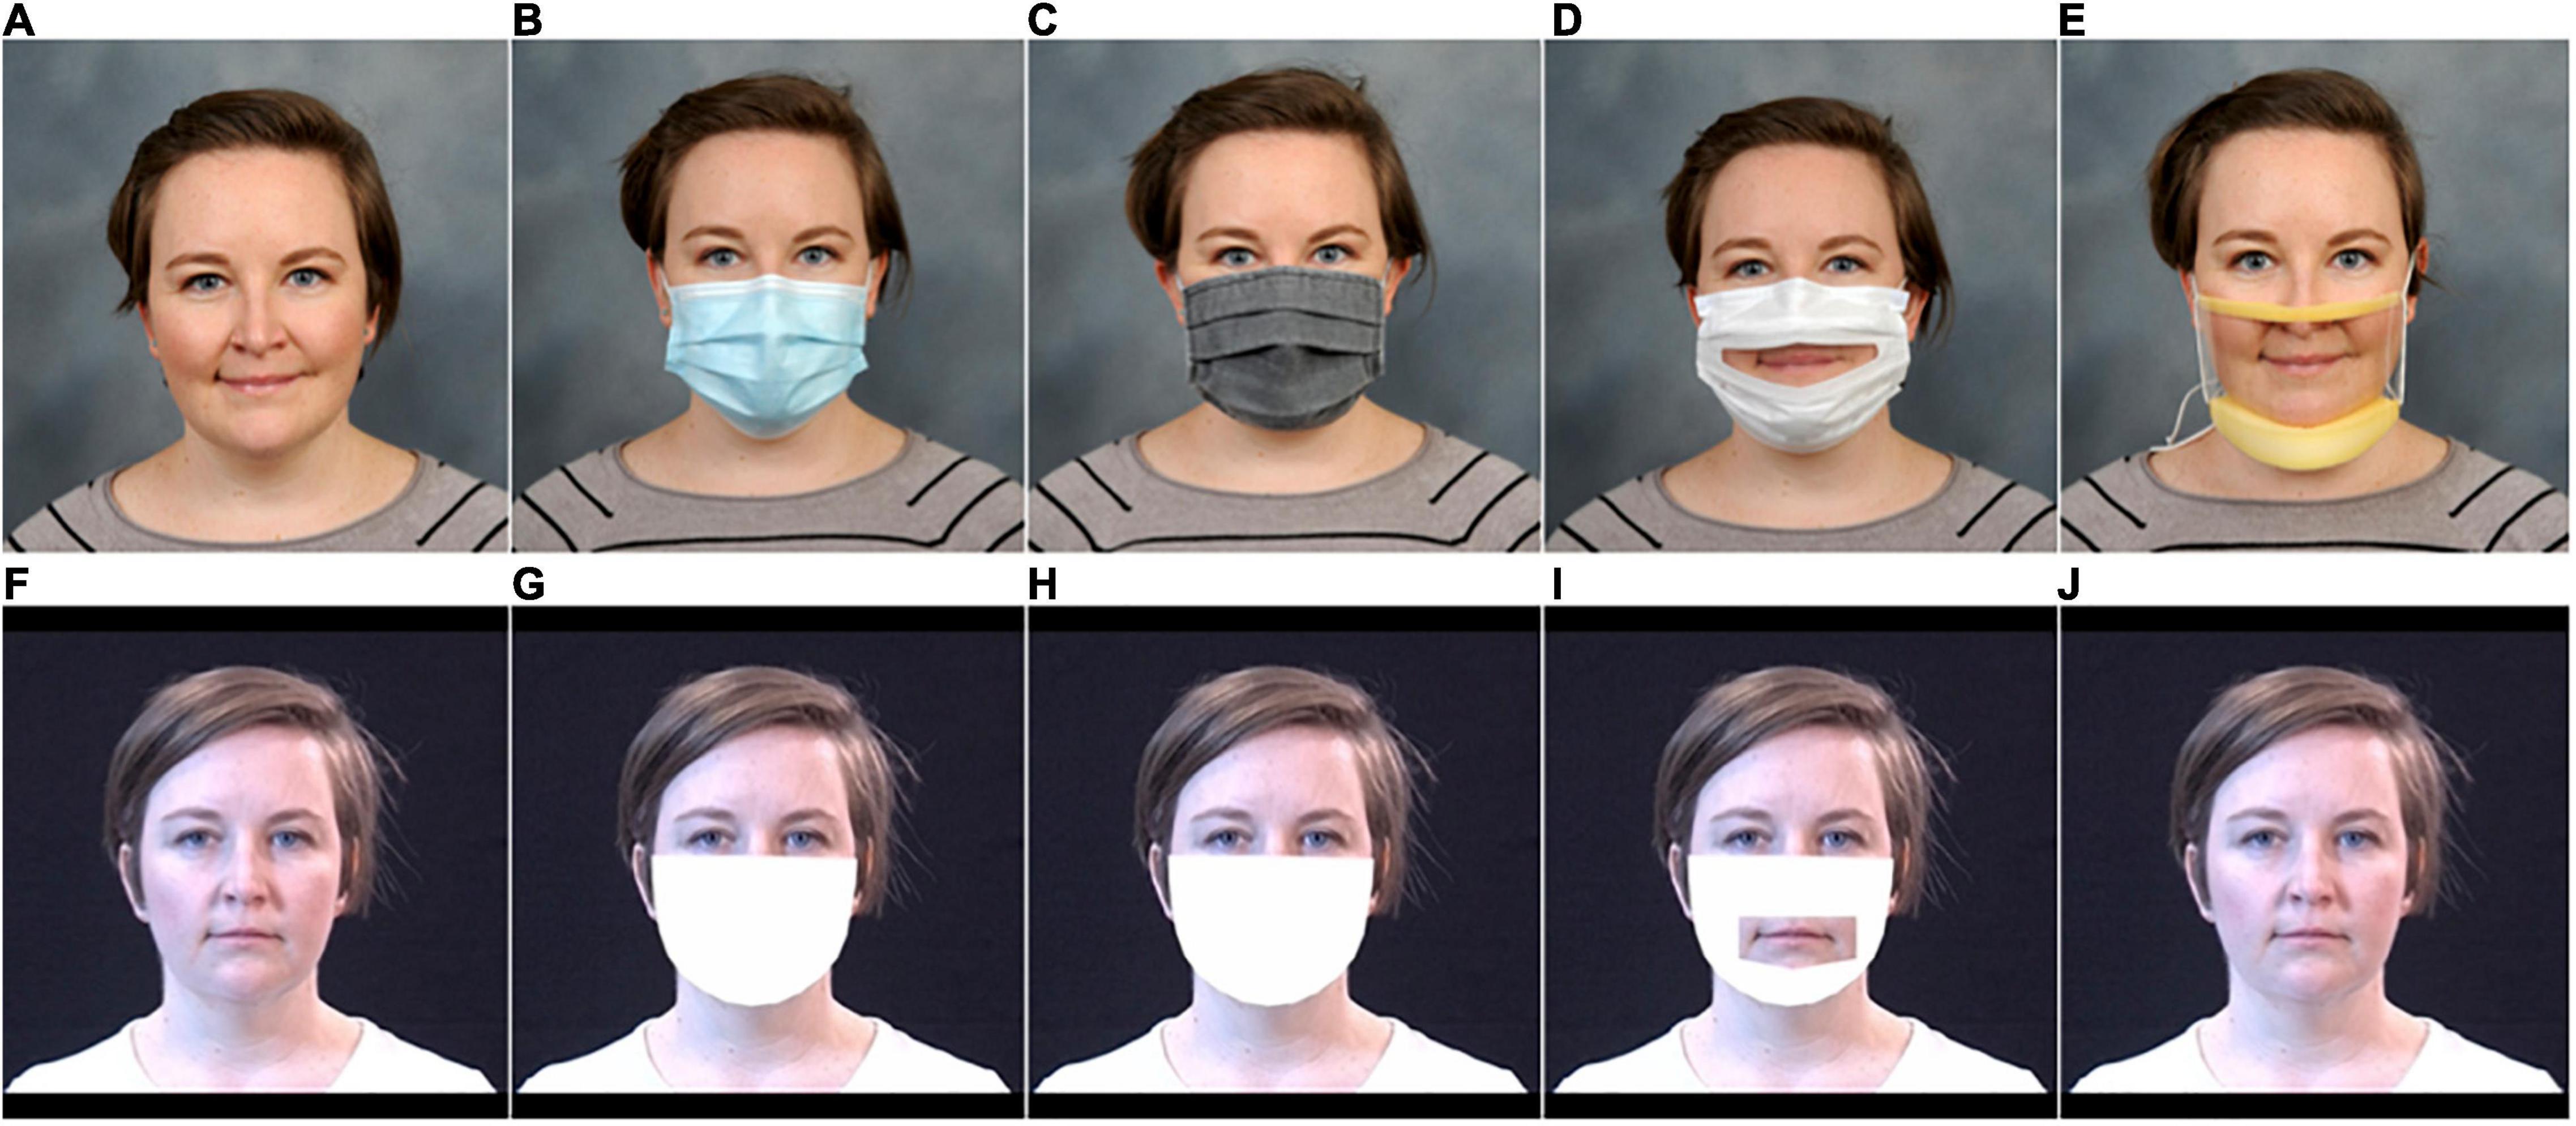 Frontiers  Face Masks Impact Auditory and Audiovisual Consonant  Recognition in Children With and Without Hearing Loss